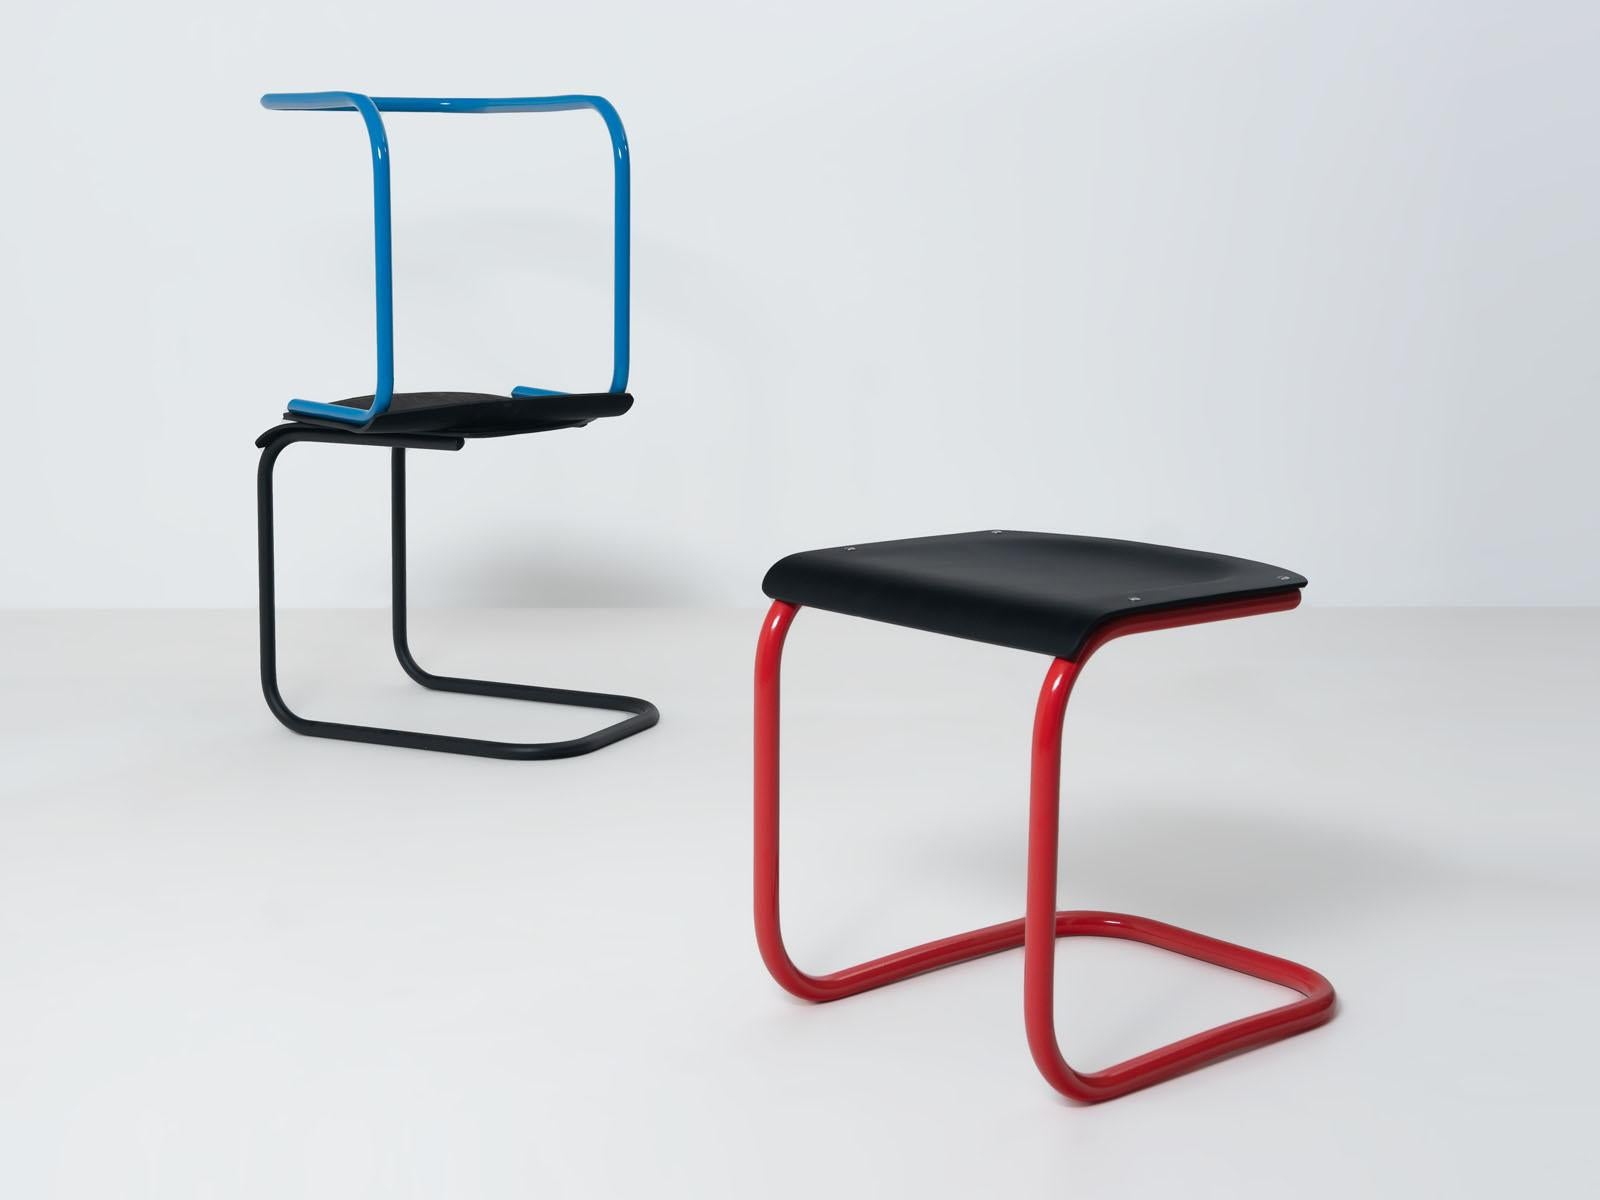 Powder-Coated Mart Stam Bauhaus Stool in Black and Red For Sale